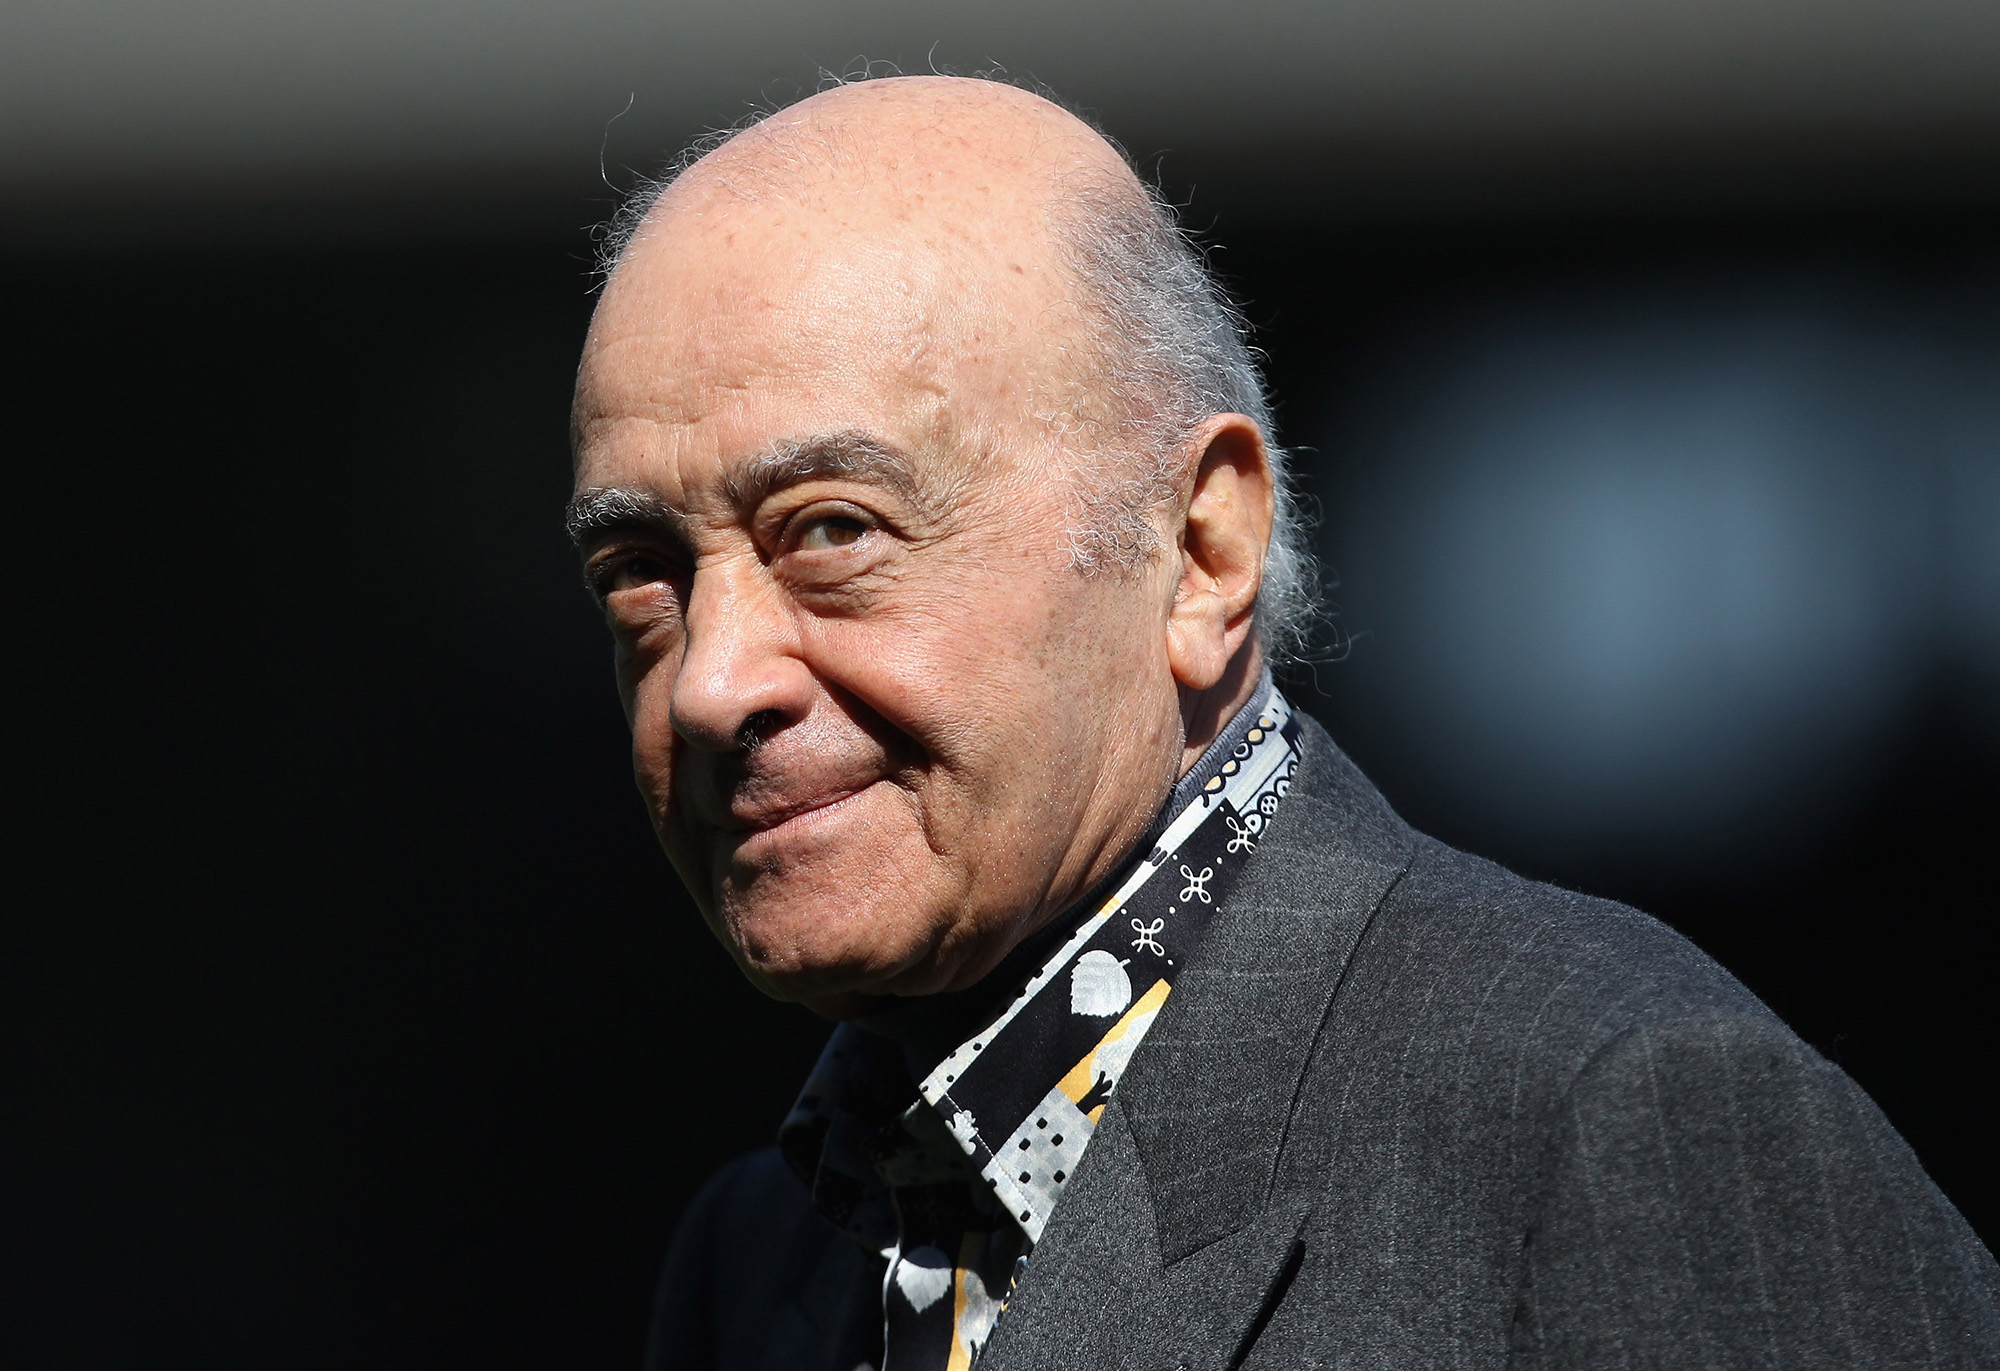 Mohamed Al Fayed, Tycoon Who Clashed With Royals, Dies at 94 - Bloomberg